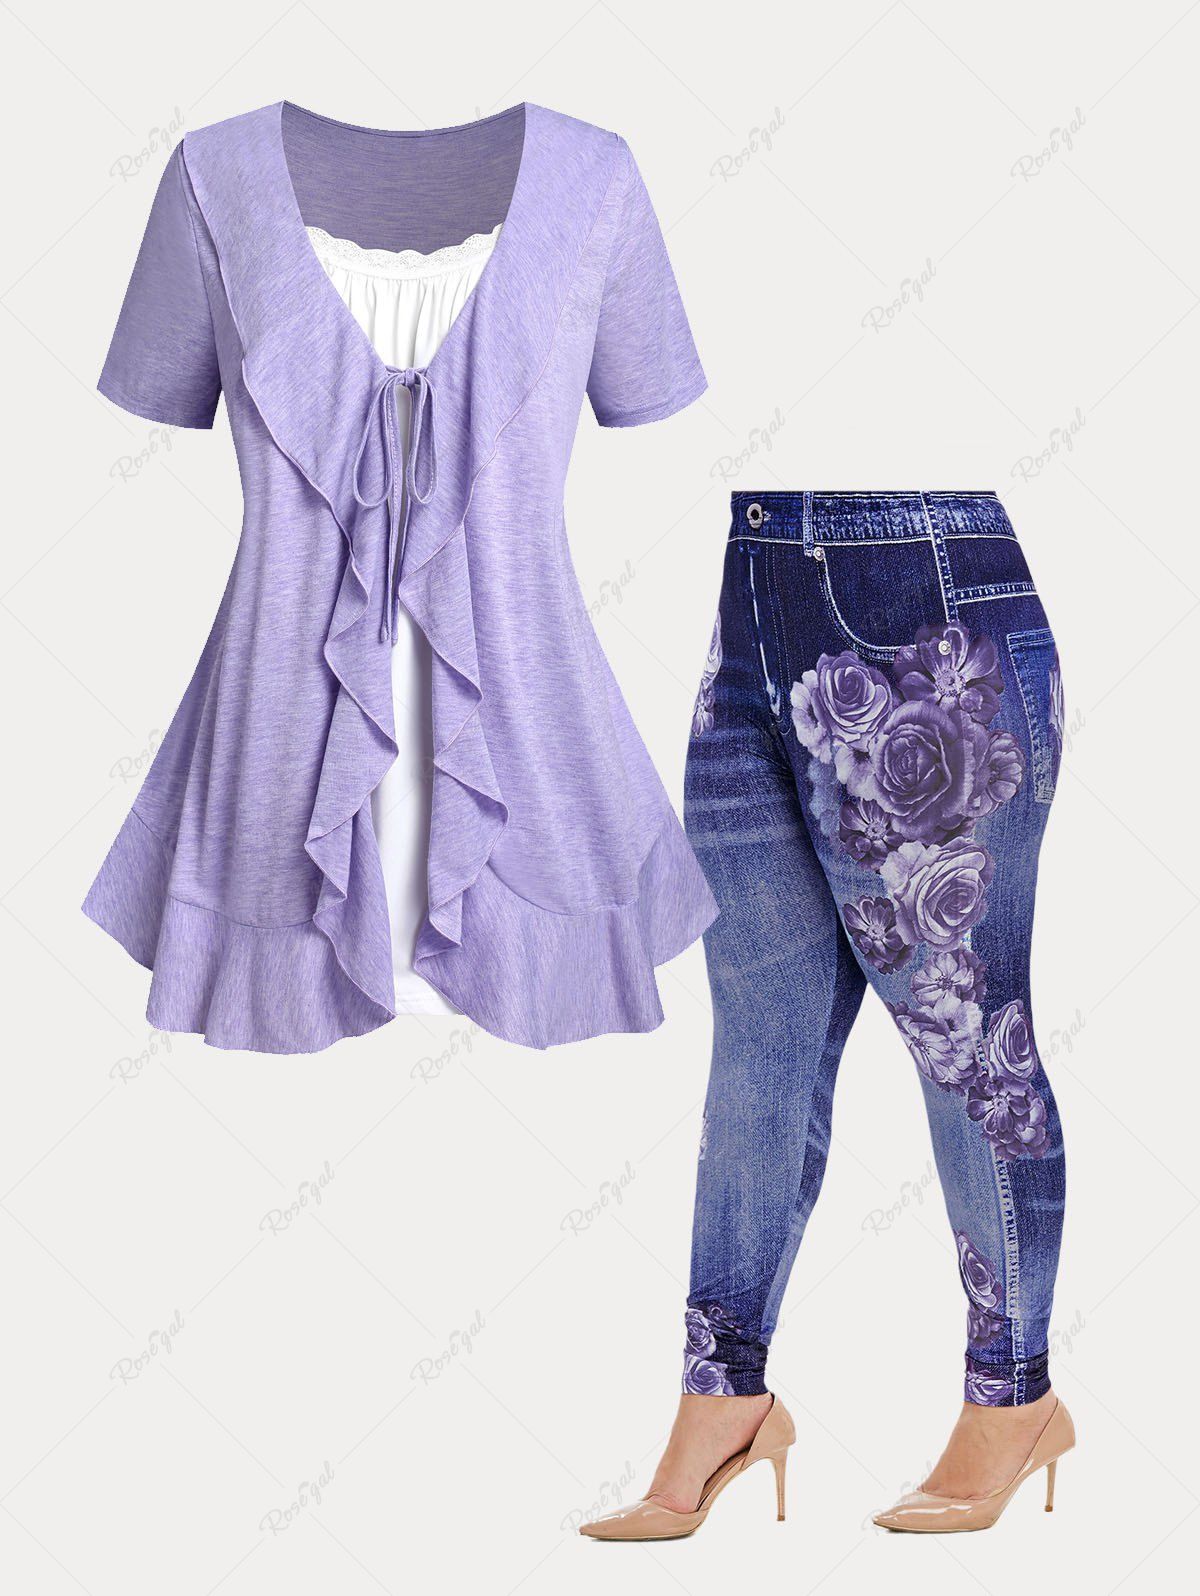 Store Lavender Ruffled 2 in 1 Tee and Floral Print 3D Jeggings Plus Size Summer Outfit  